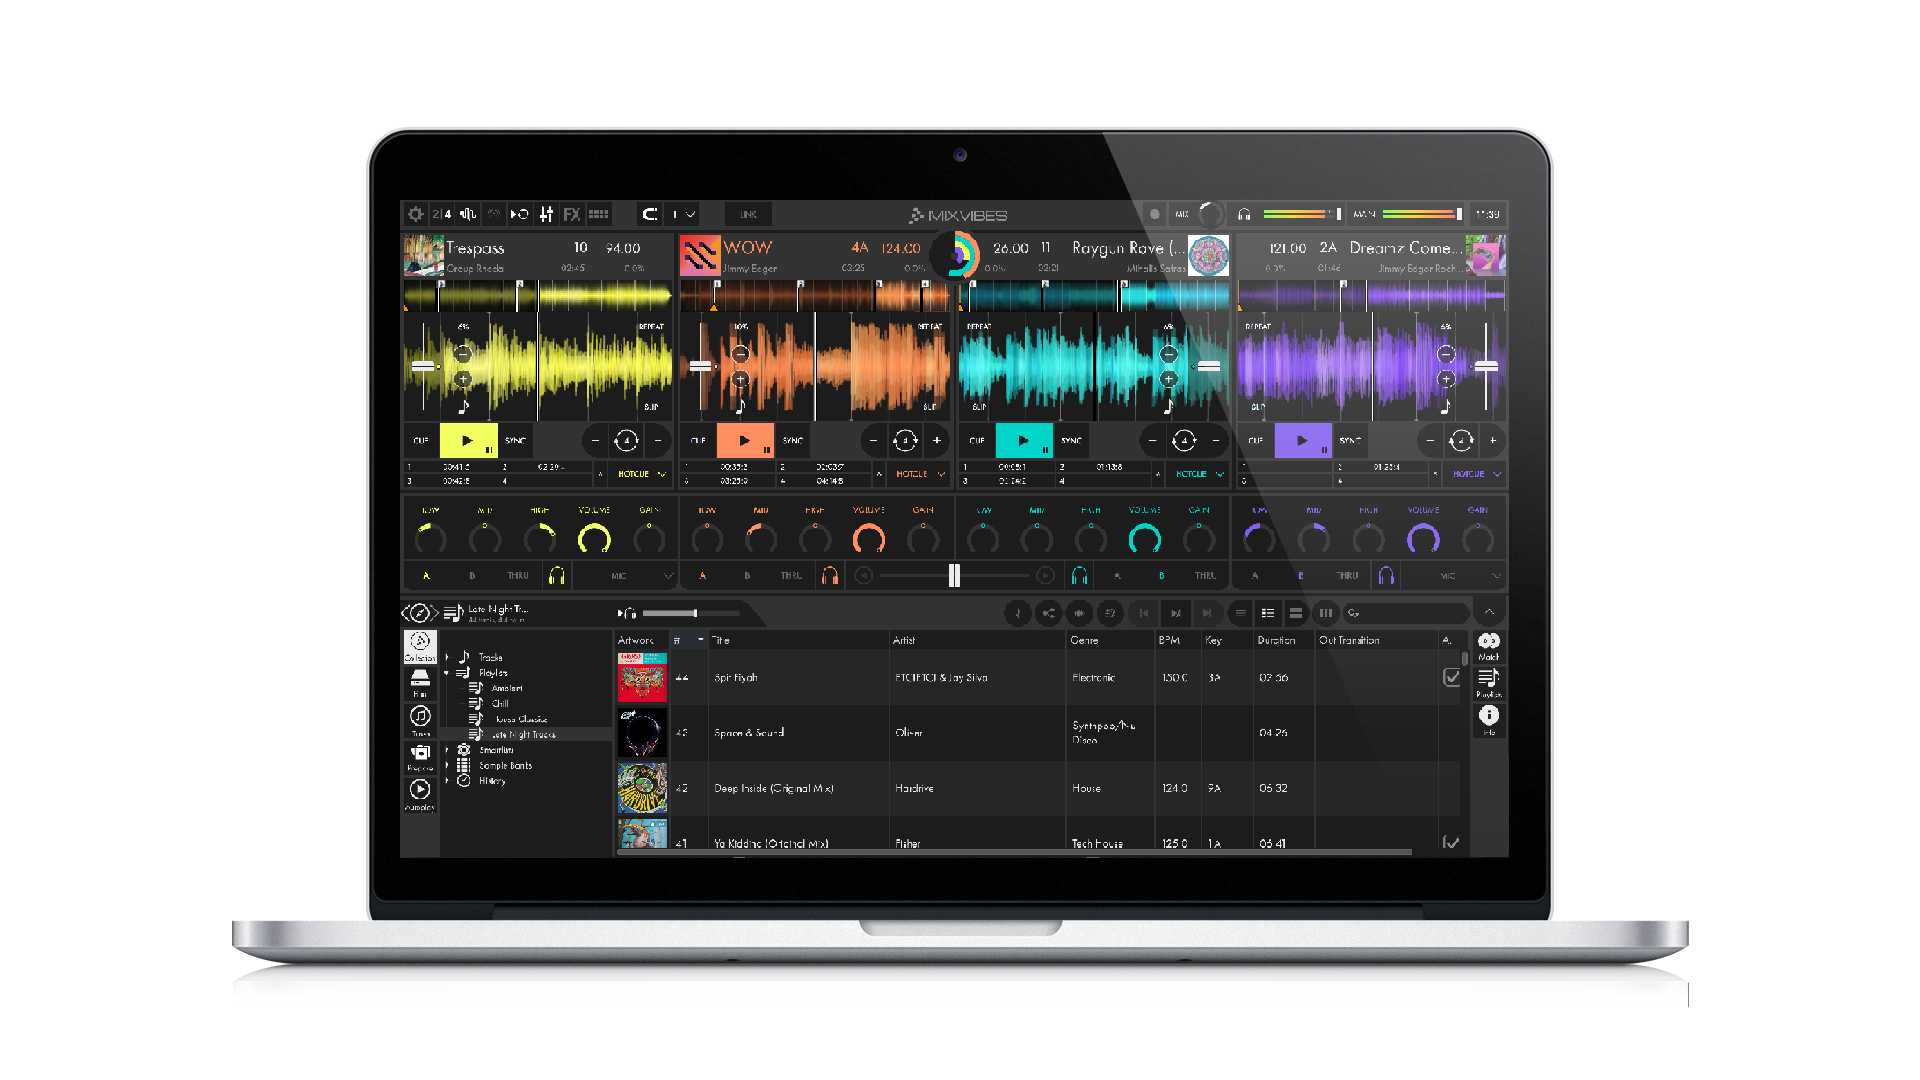 Cross dj app for android free download free